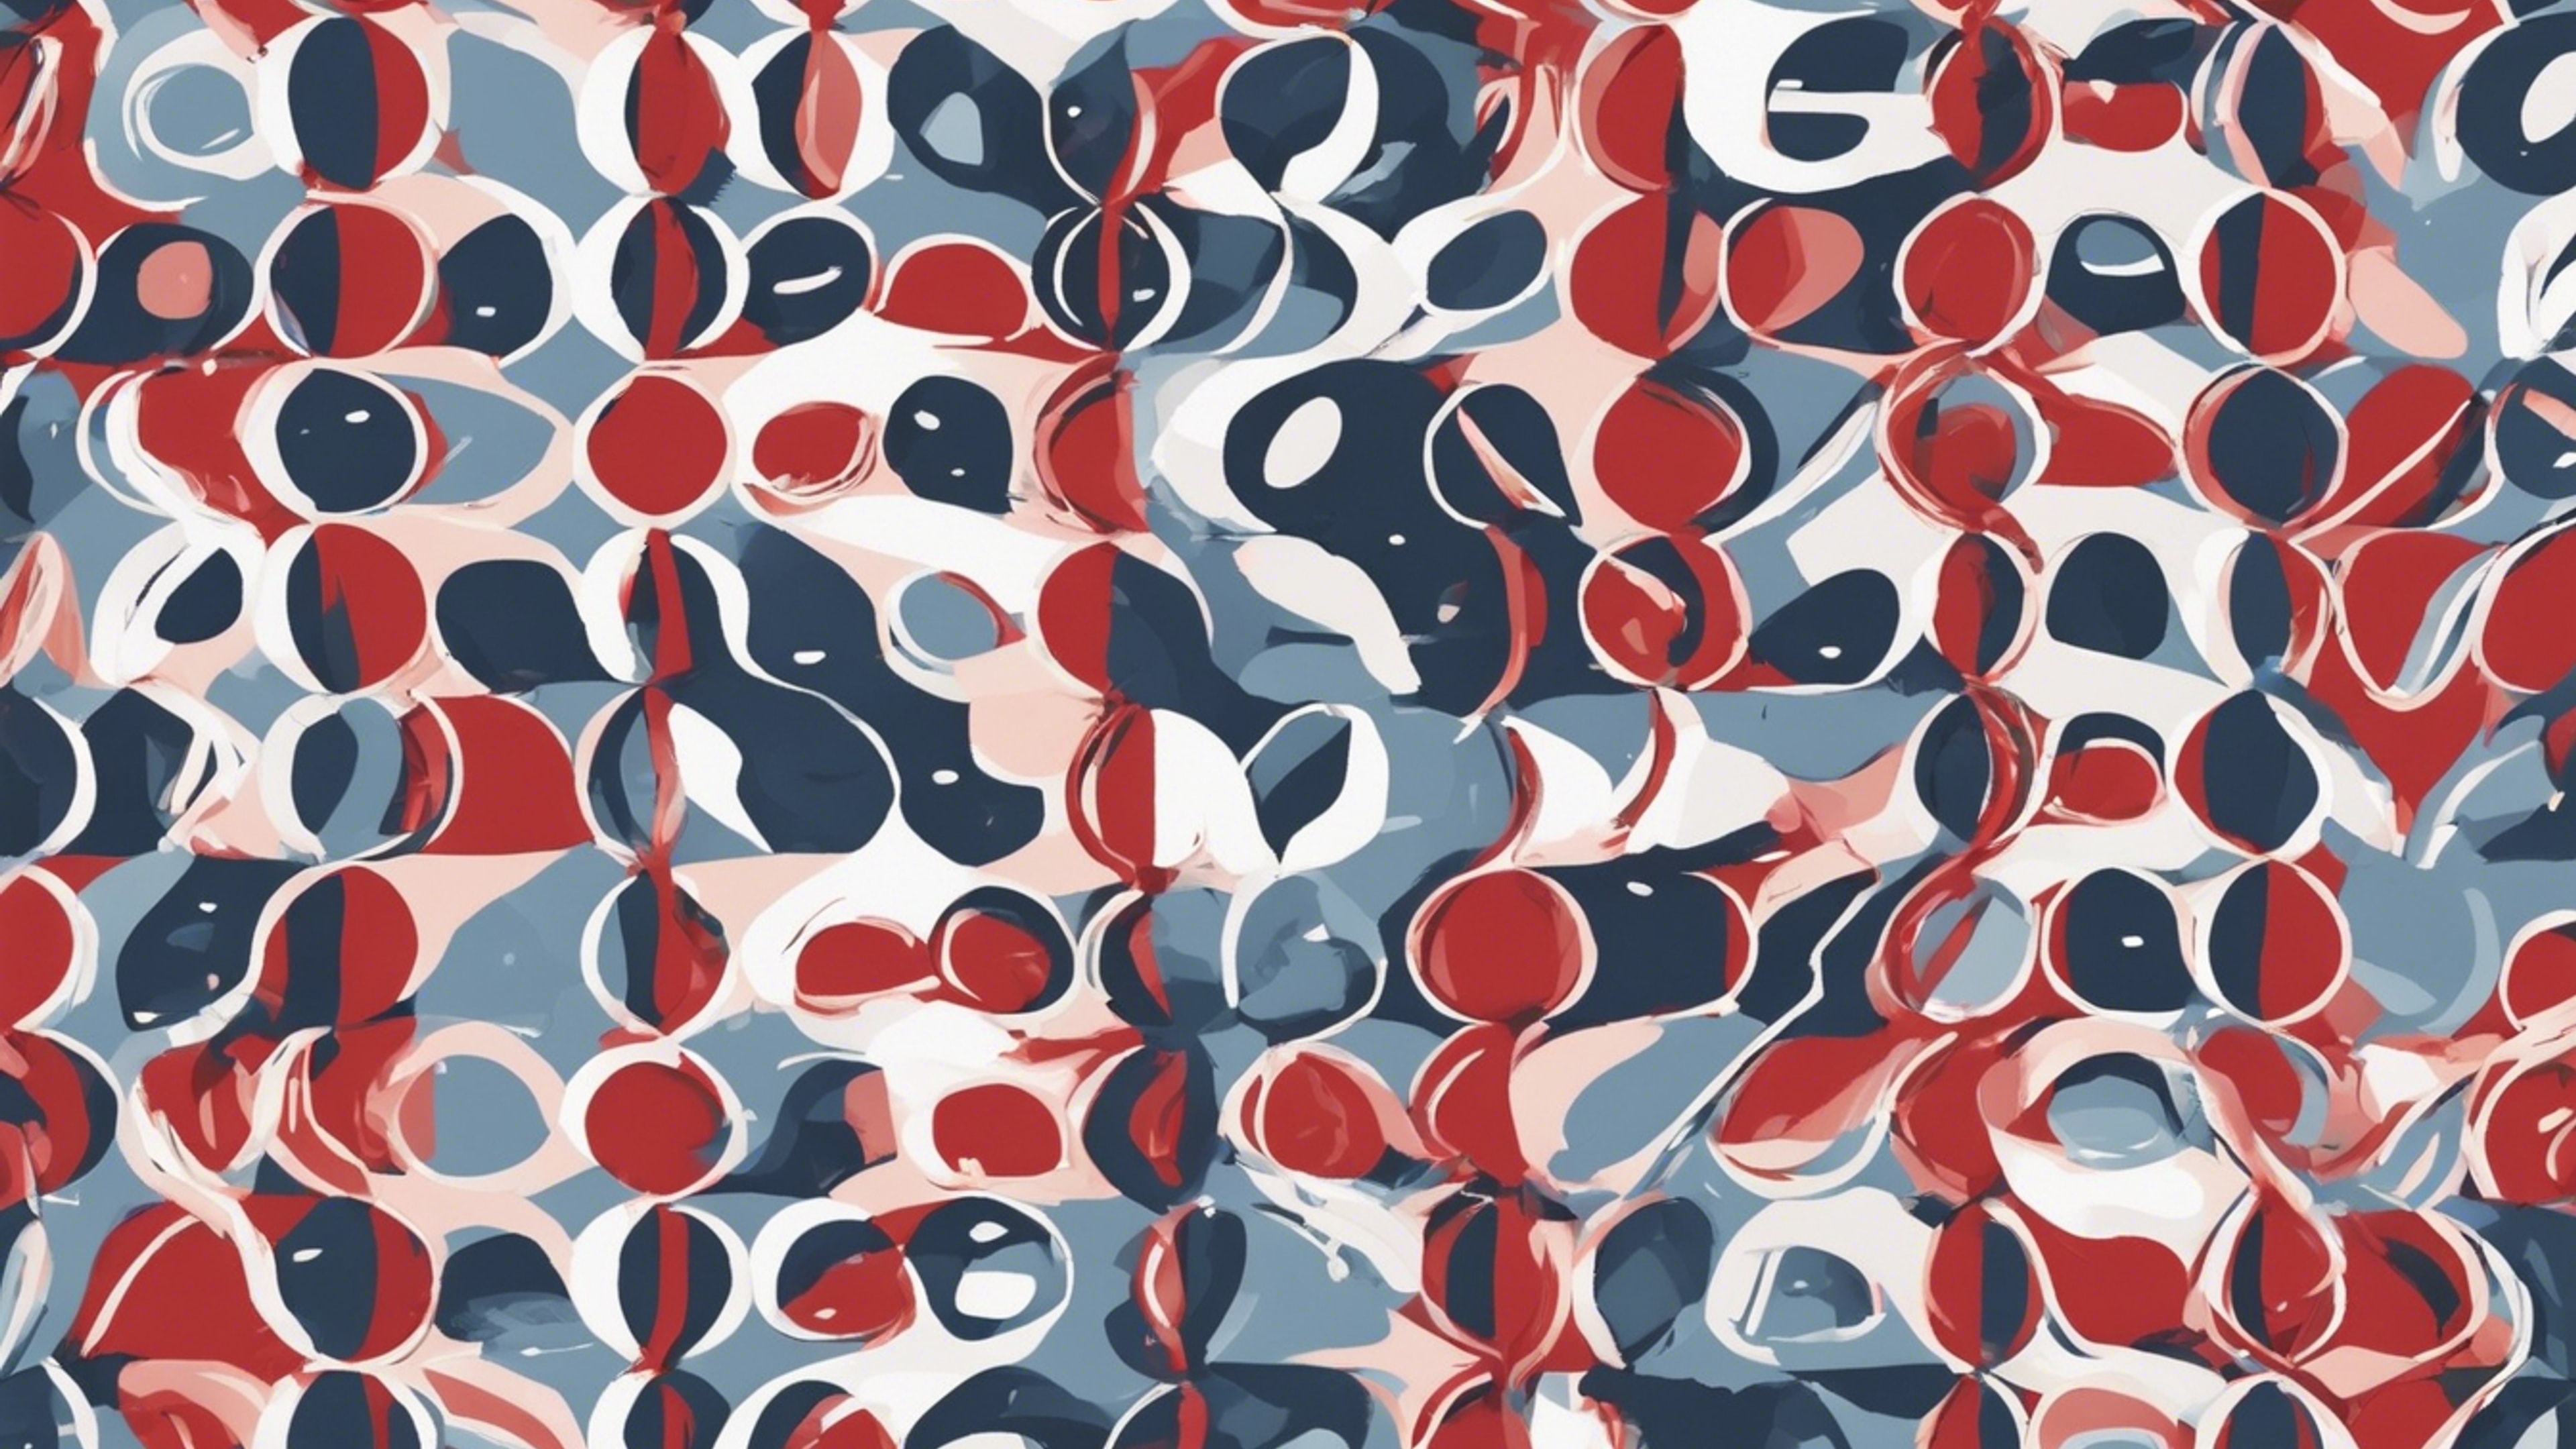 Simple and clean Scandinavian red and blue pattern. Papel de parede[367ad8fa403444a2bdd2]